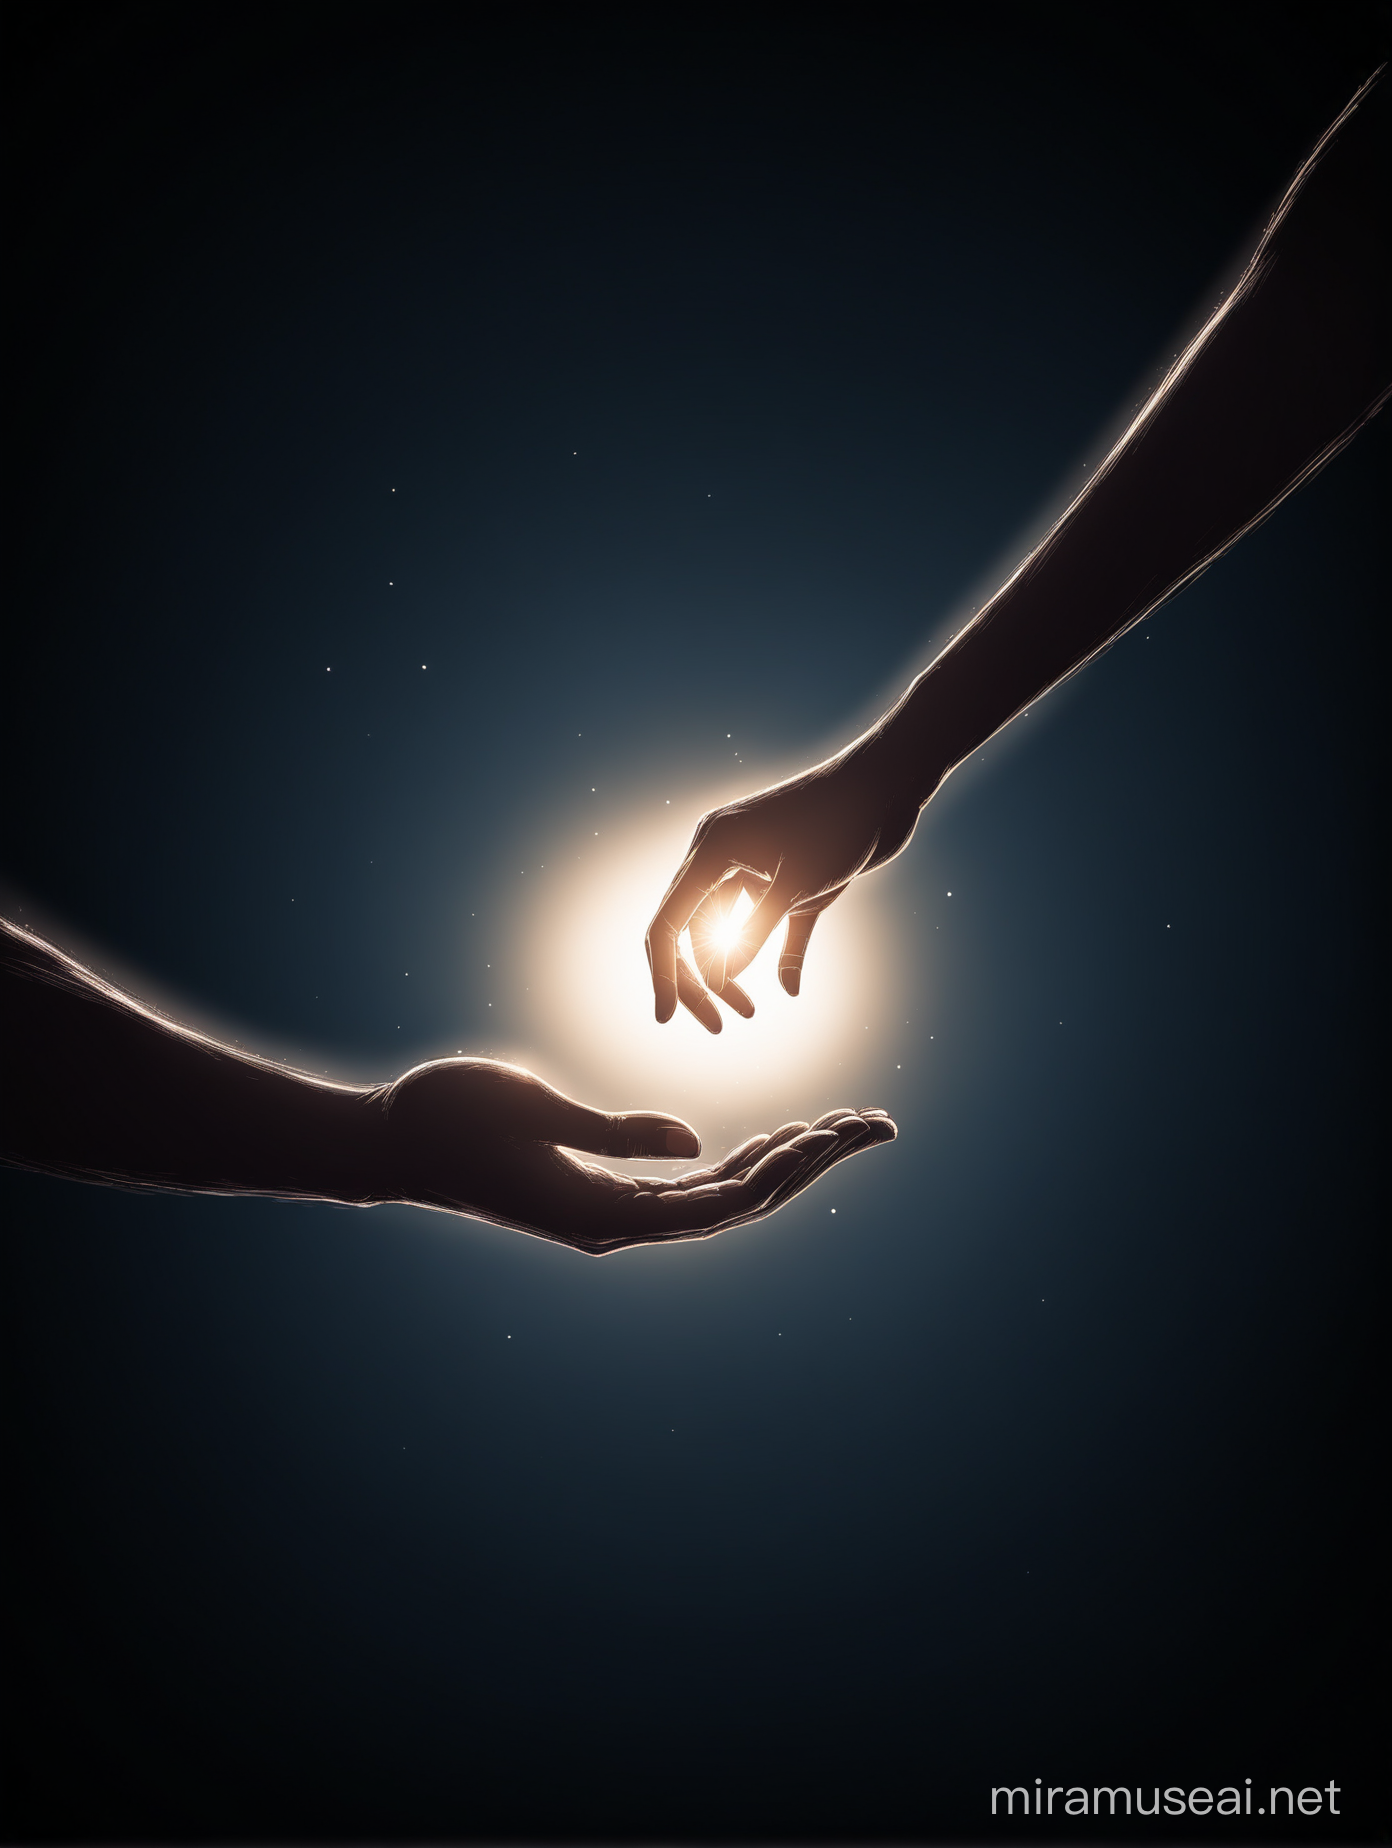  a person extending a hand of compassion and understanding toward another, despite the darkness that surrounds them